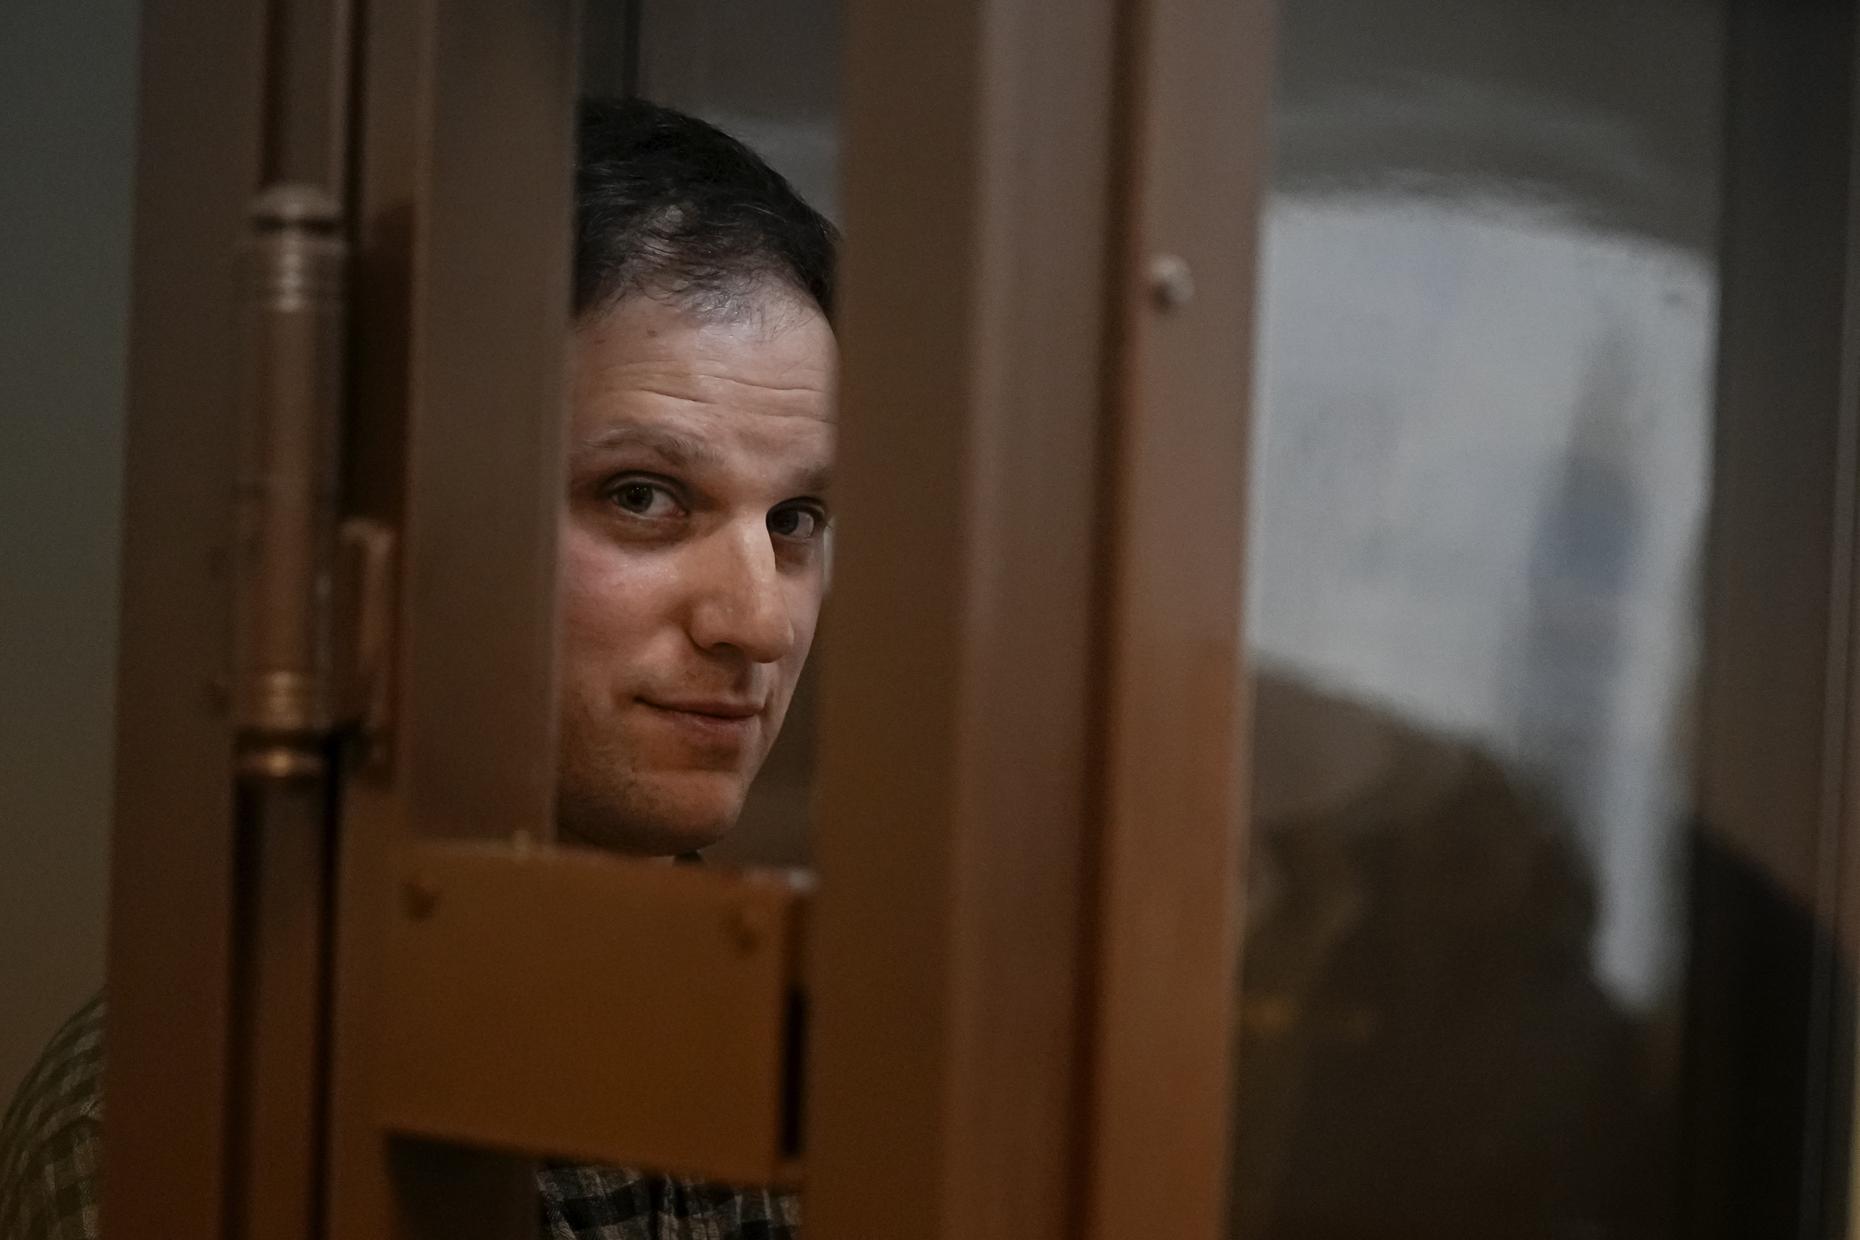 Evan Gershkovich Has Been In Prison In Russia For A Year